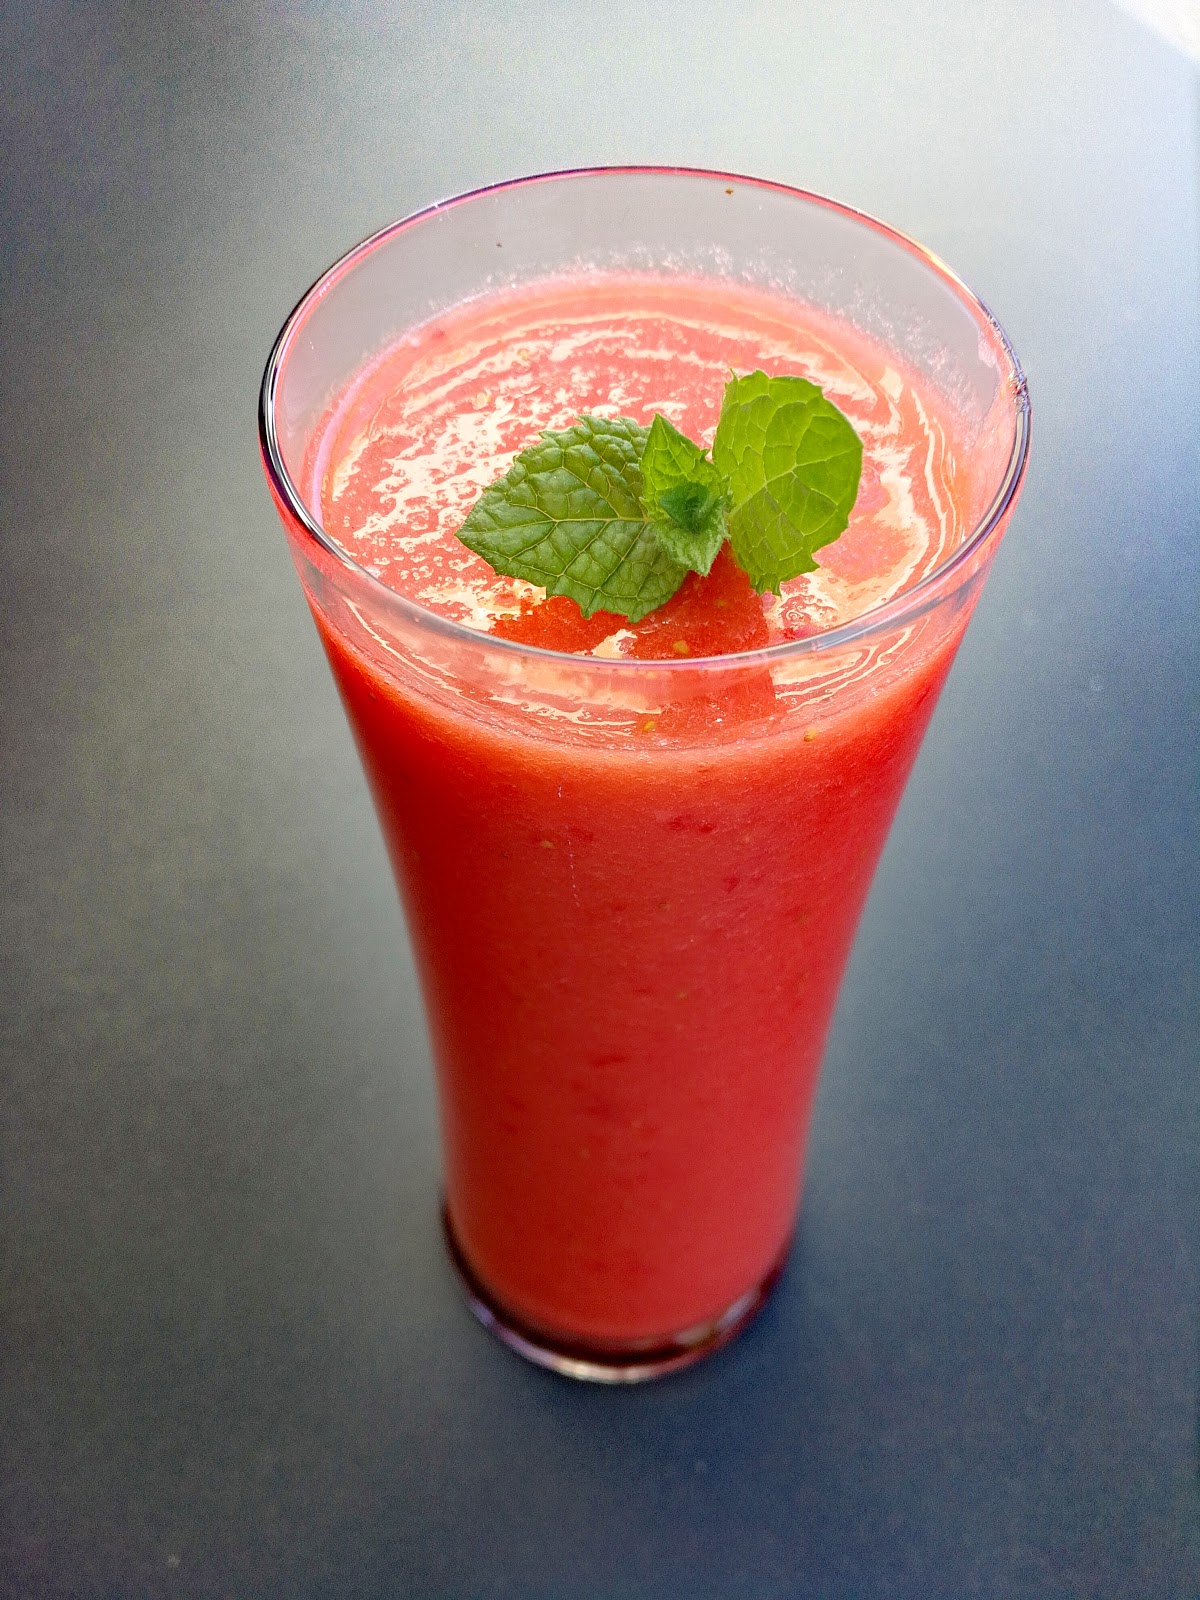 COOKING LIKE A STAR: Erdbeere- Melonen Smoothie